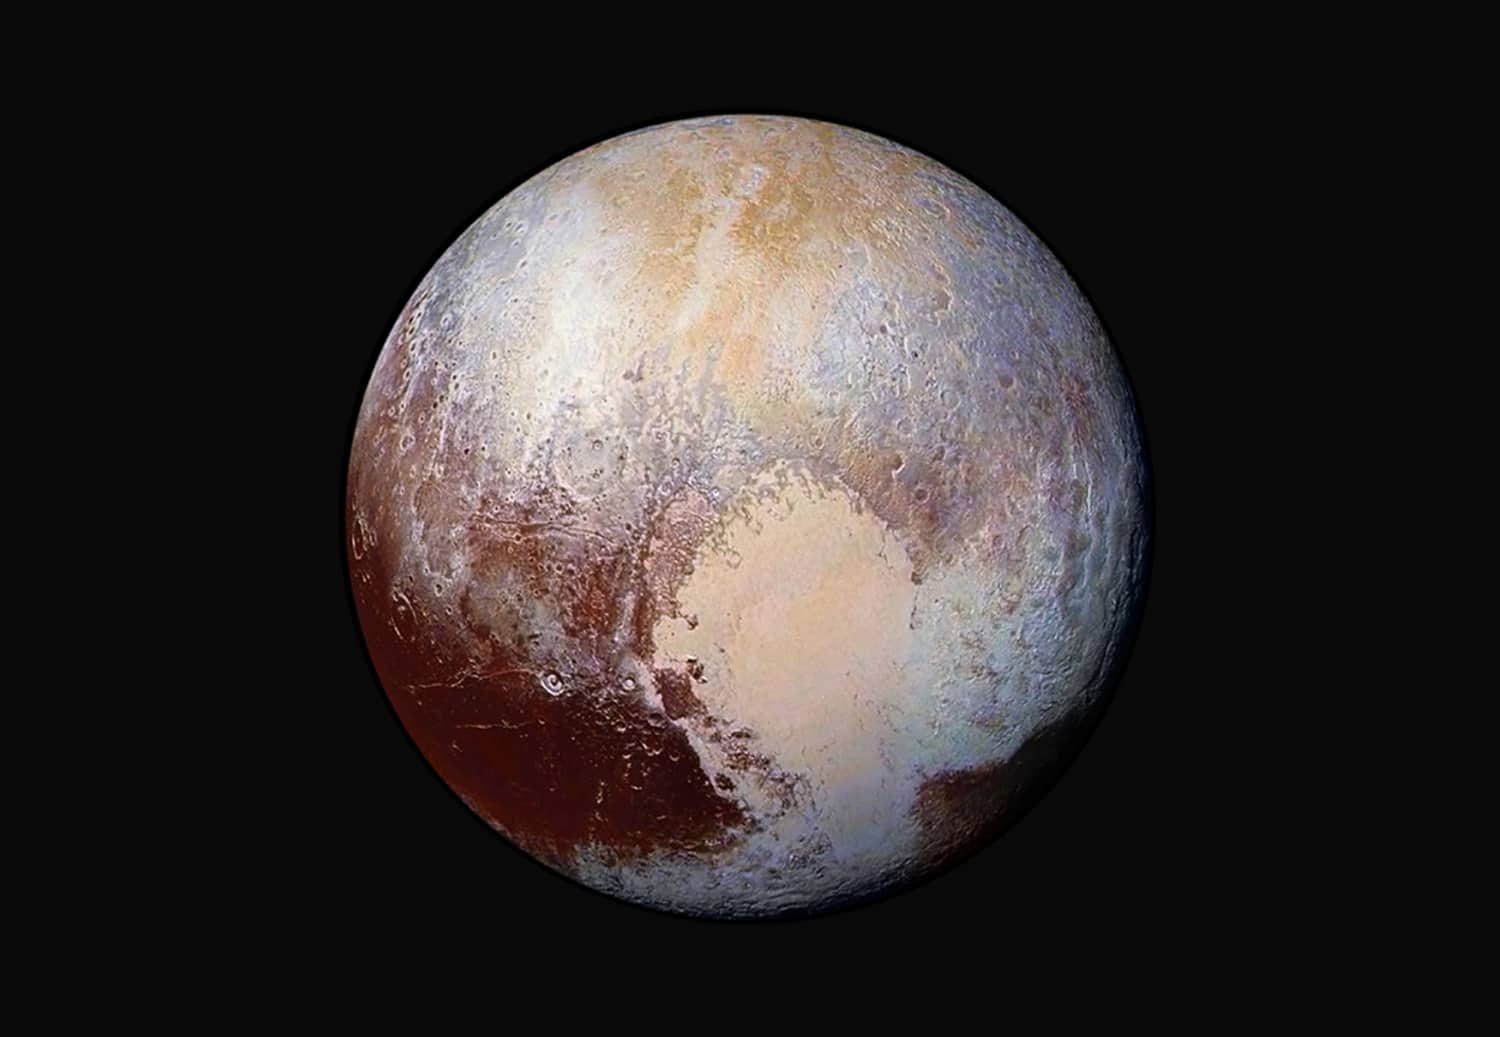 This NASA image obtained July 24, 2015 shows how New Horizons scientists have used enhanced color images to detect differences in the composition and texture of Pluto's surface. The heart of the heart, Sputnik Planum, is suggestive of a source region of ices. The two bluish-white lobes that extend to the southwest and northeast of the heart may represent exotic ices being transported away from Sputnik Planum.